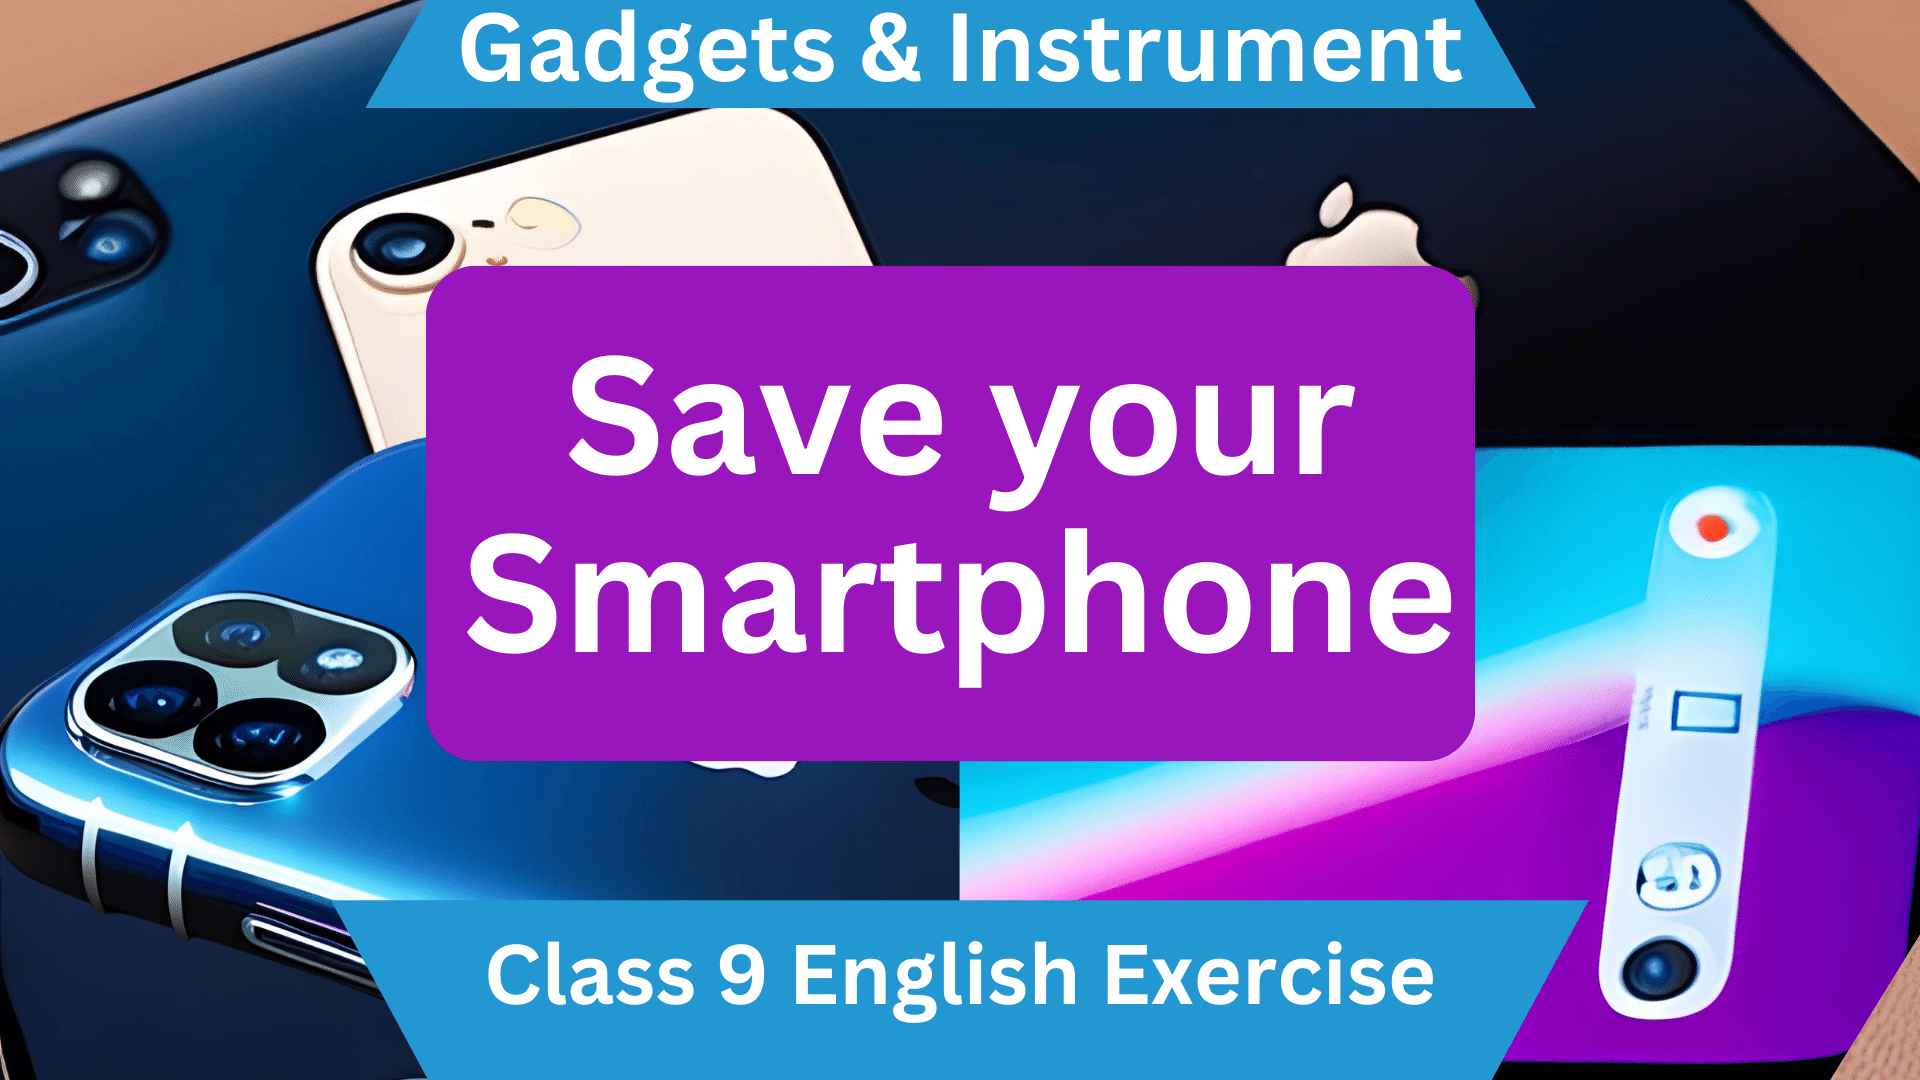 Unit-11 Gadgets & Instrument: Save your Smartphone - Class 9 English Exercise